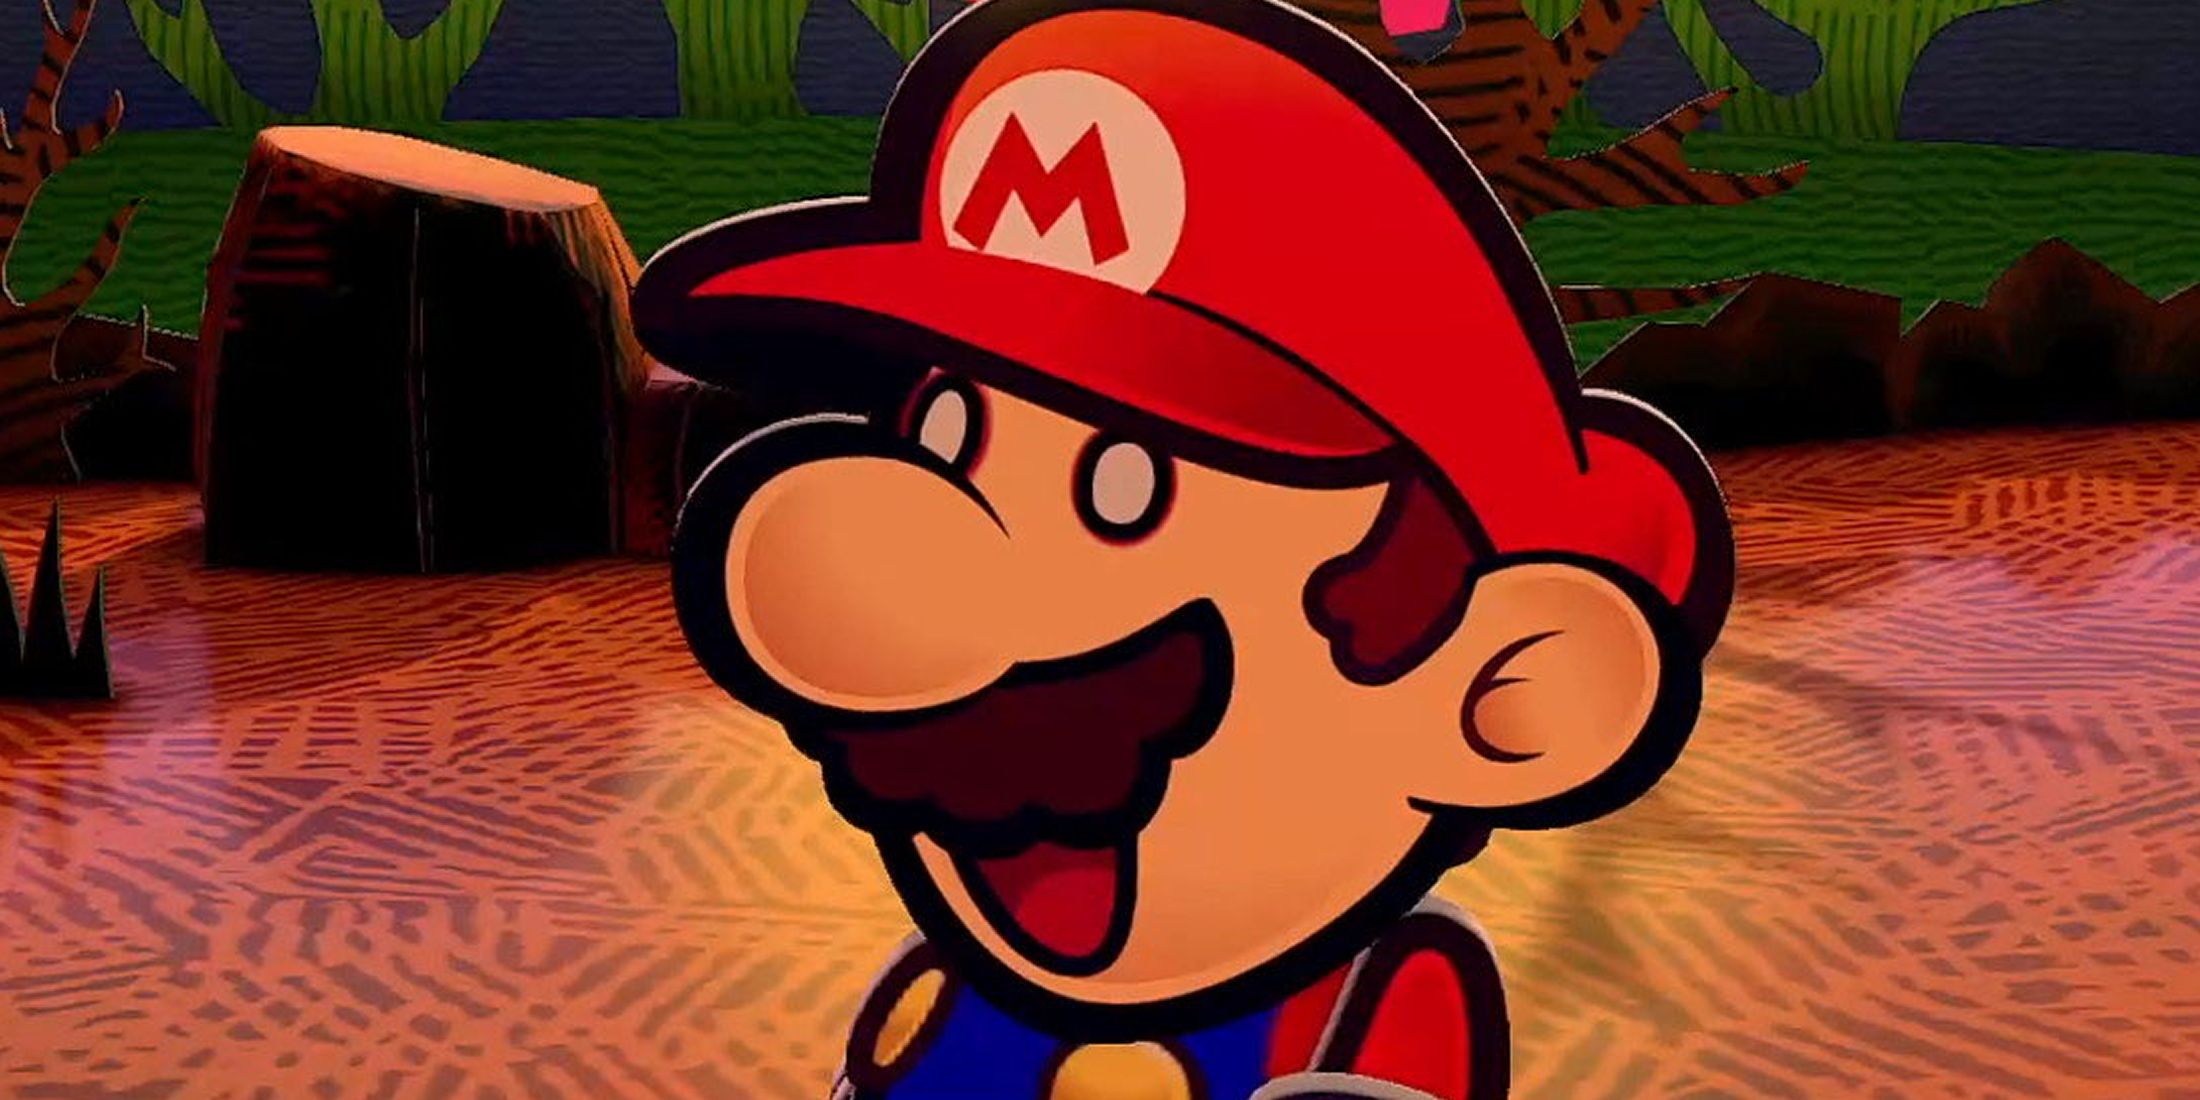 paper-mario-the-thousand-year-doopliss-name-mario-guess-cutscene-close-up